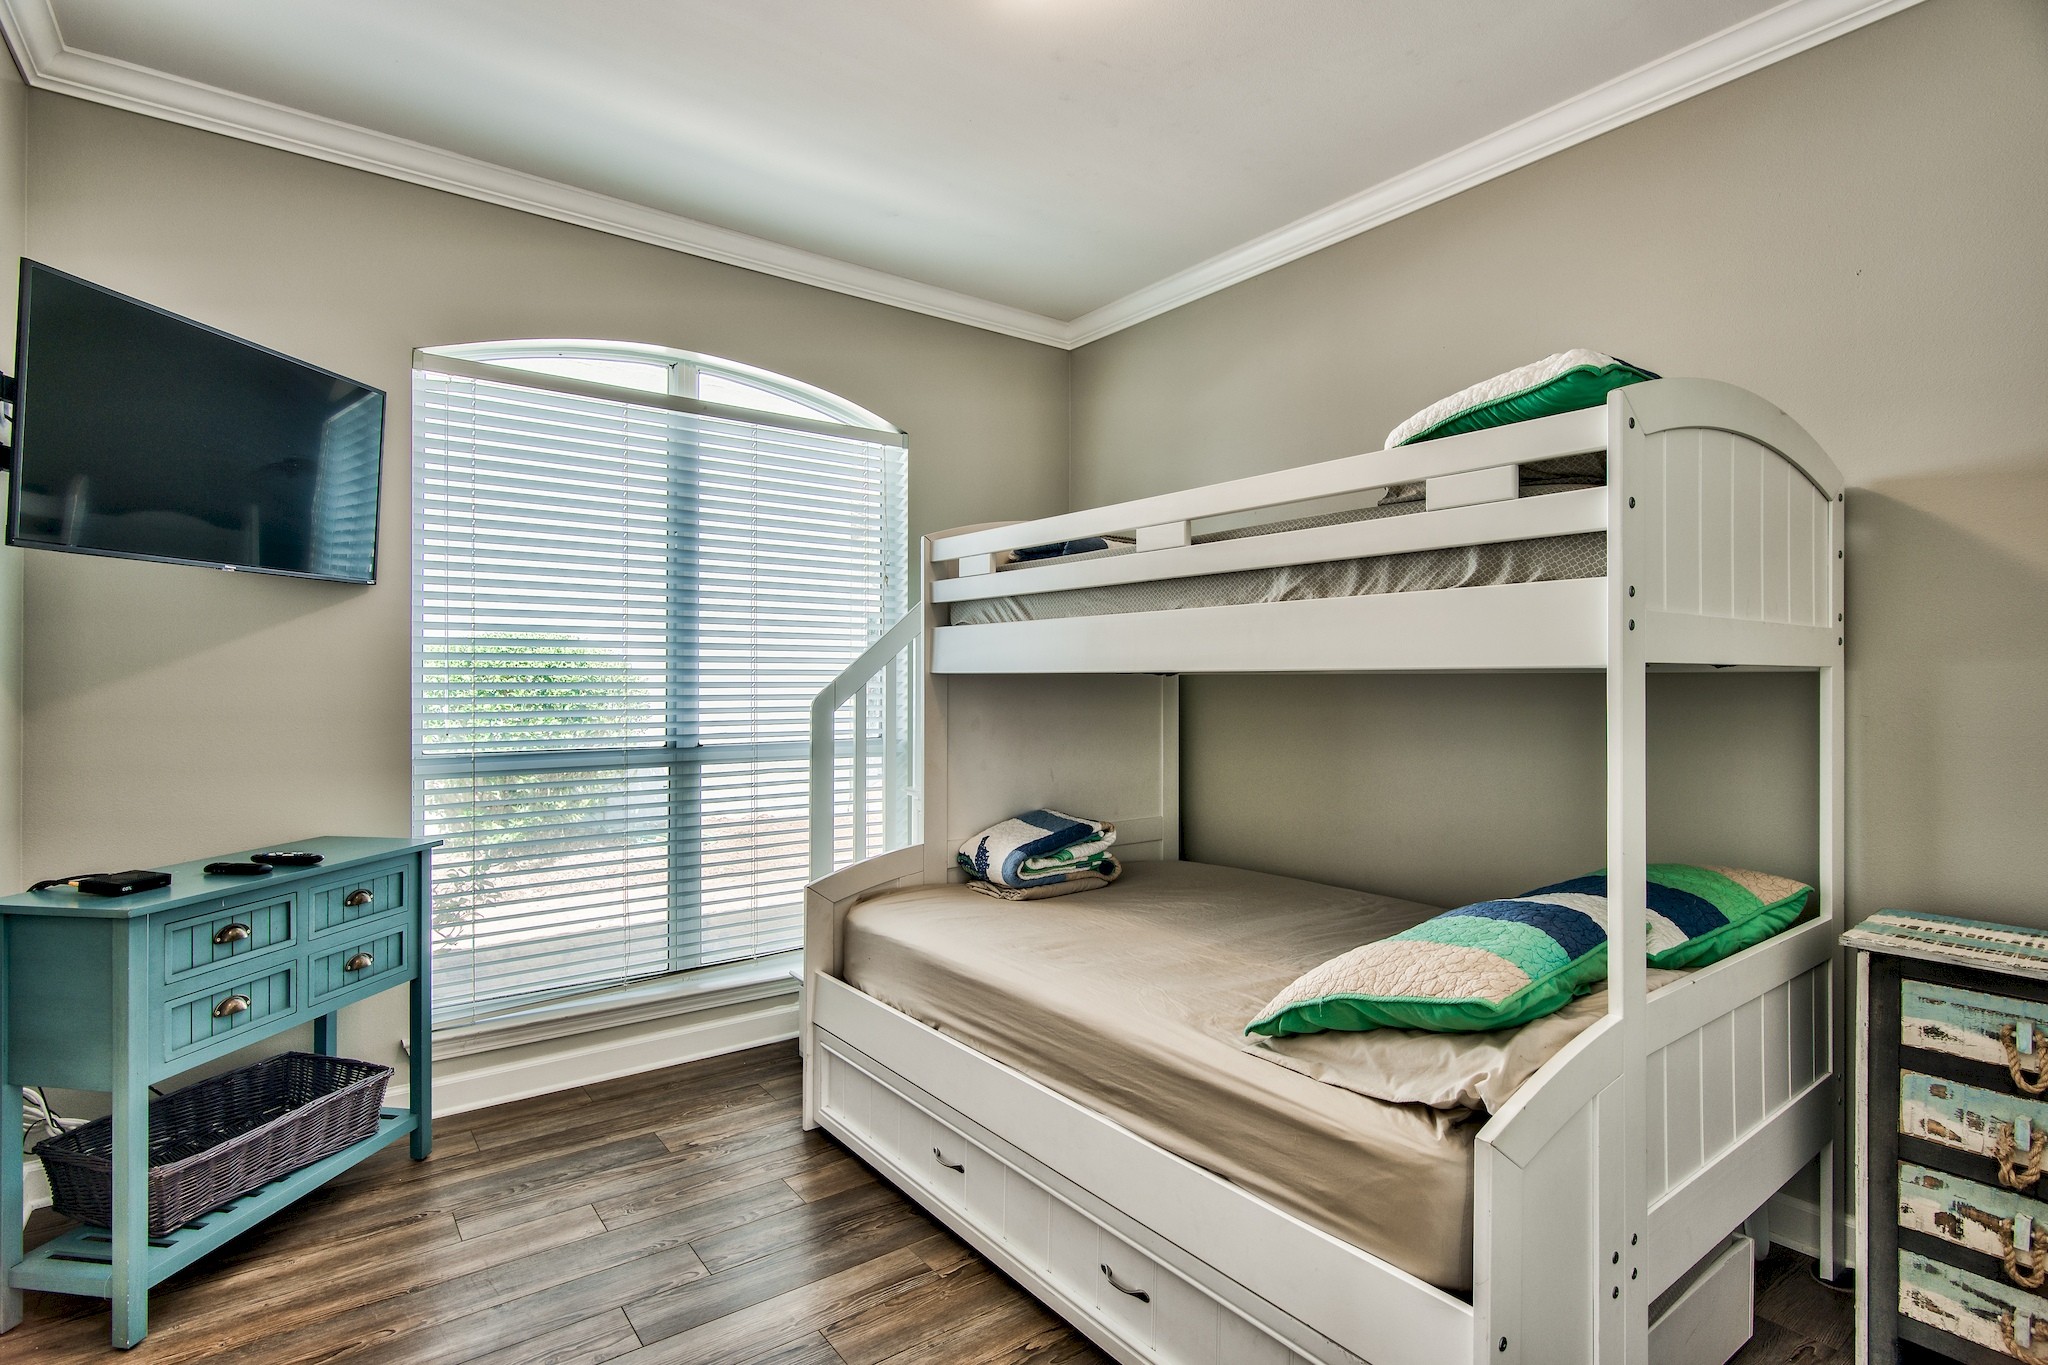 3rd Guest Bedroom: 1 bunkbed with twin on top/full bed on bottom, twin trundle bed and attached Full Jack-N-Jill Bathroom (sl